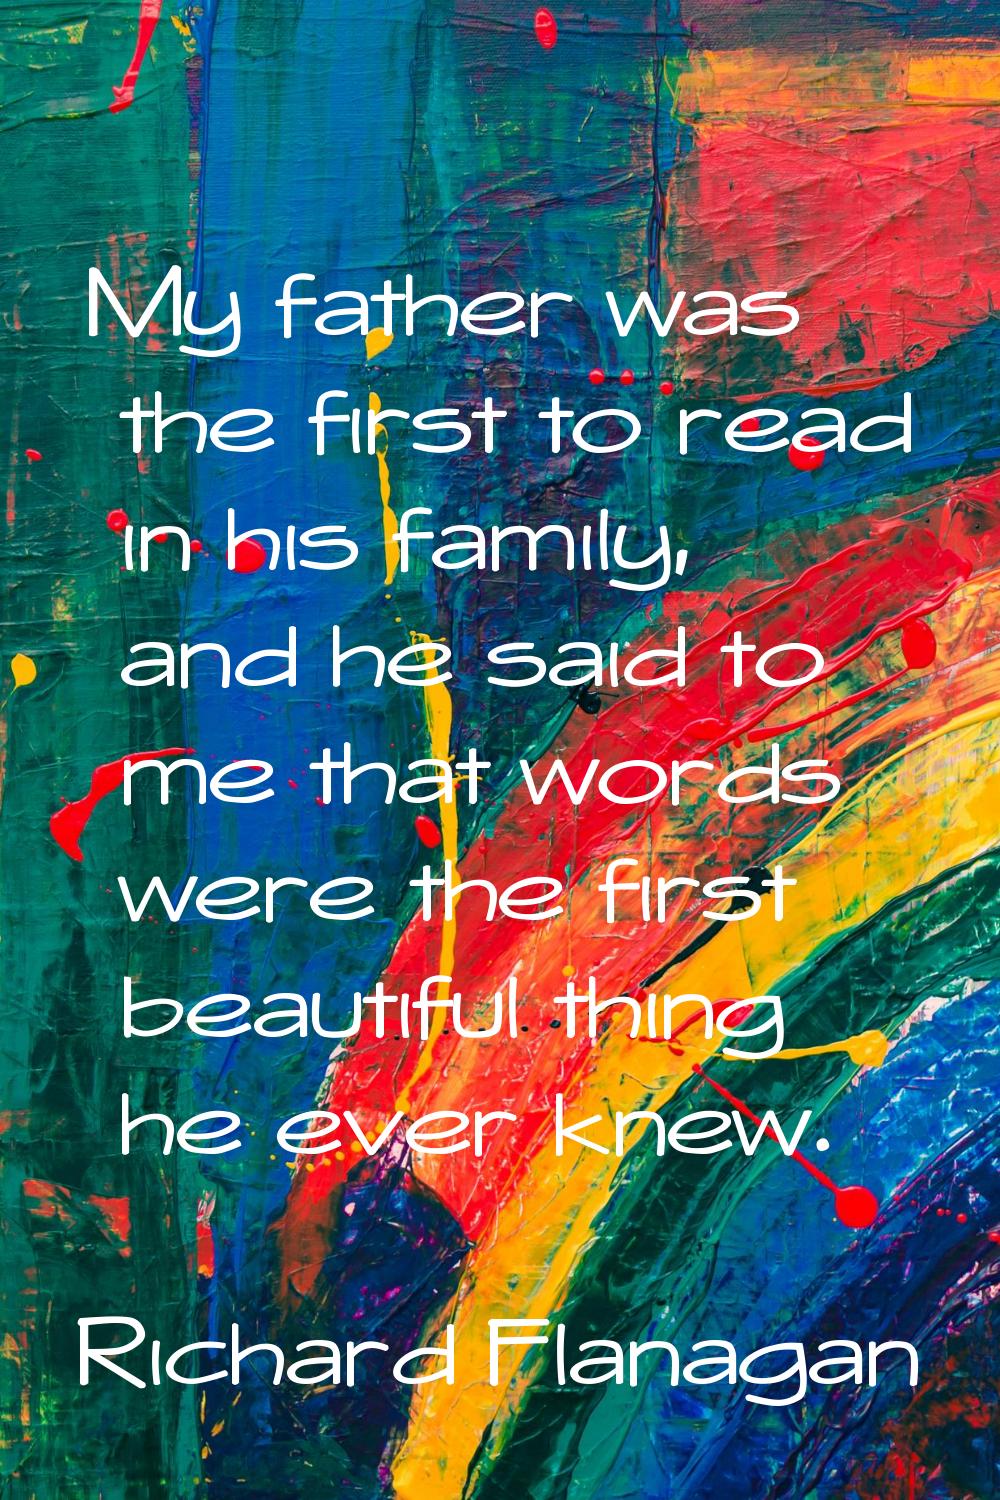 My father was the first to read in his family, and he said to me that words were the first beautifu